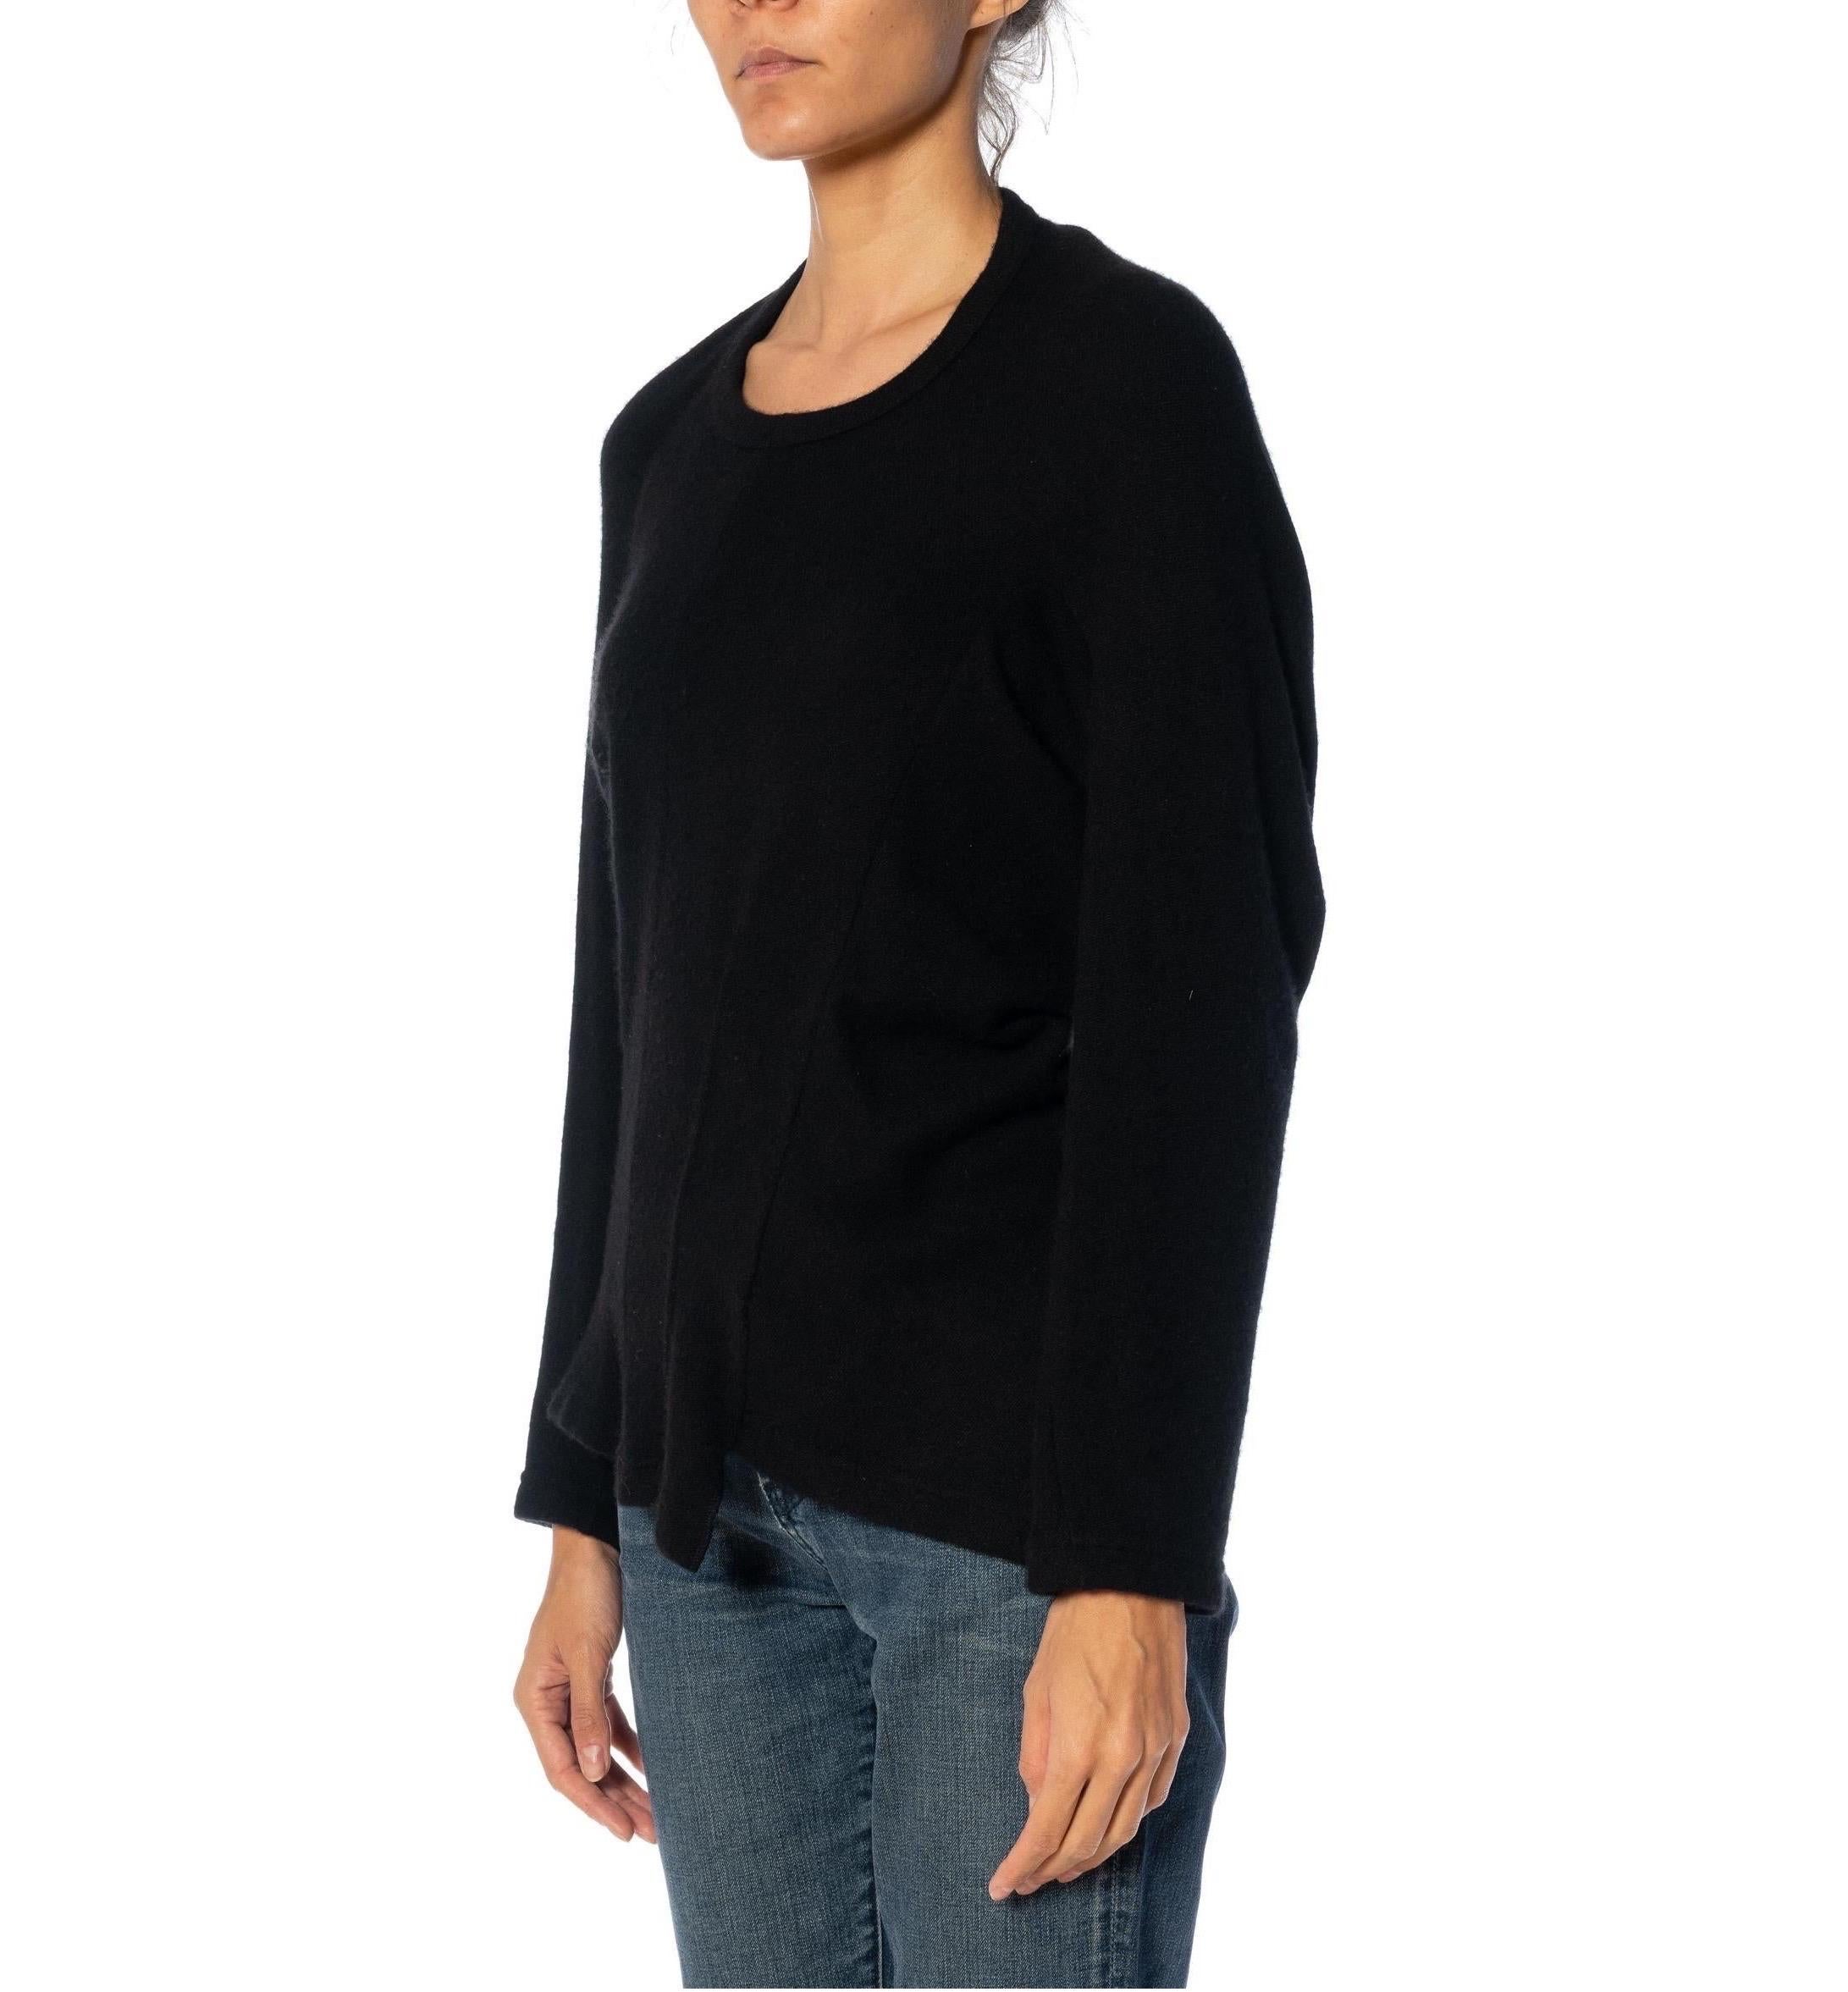 2000S COMME DES GARCONS Black Cashmere Asymmetrically Seamed Sweater 2004 For Sale 3